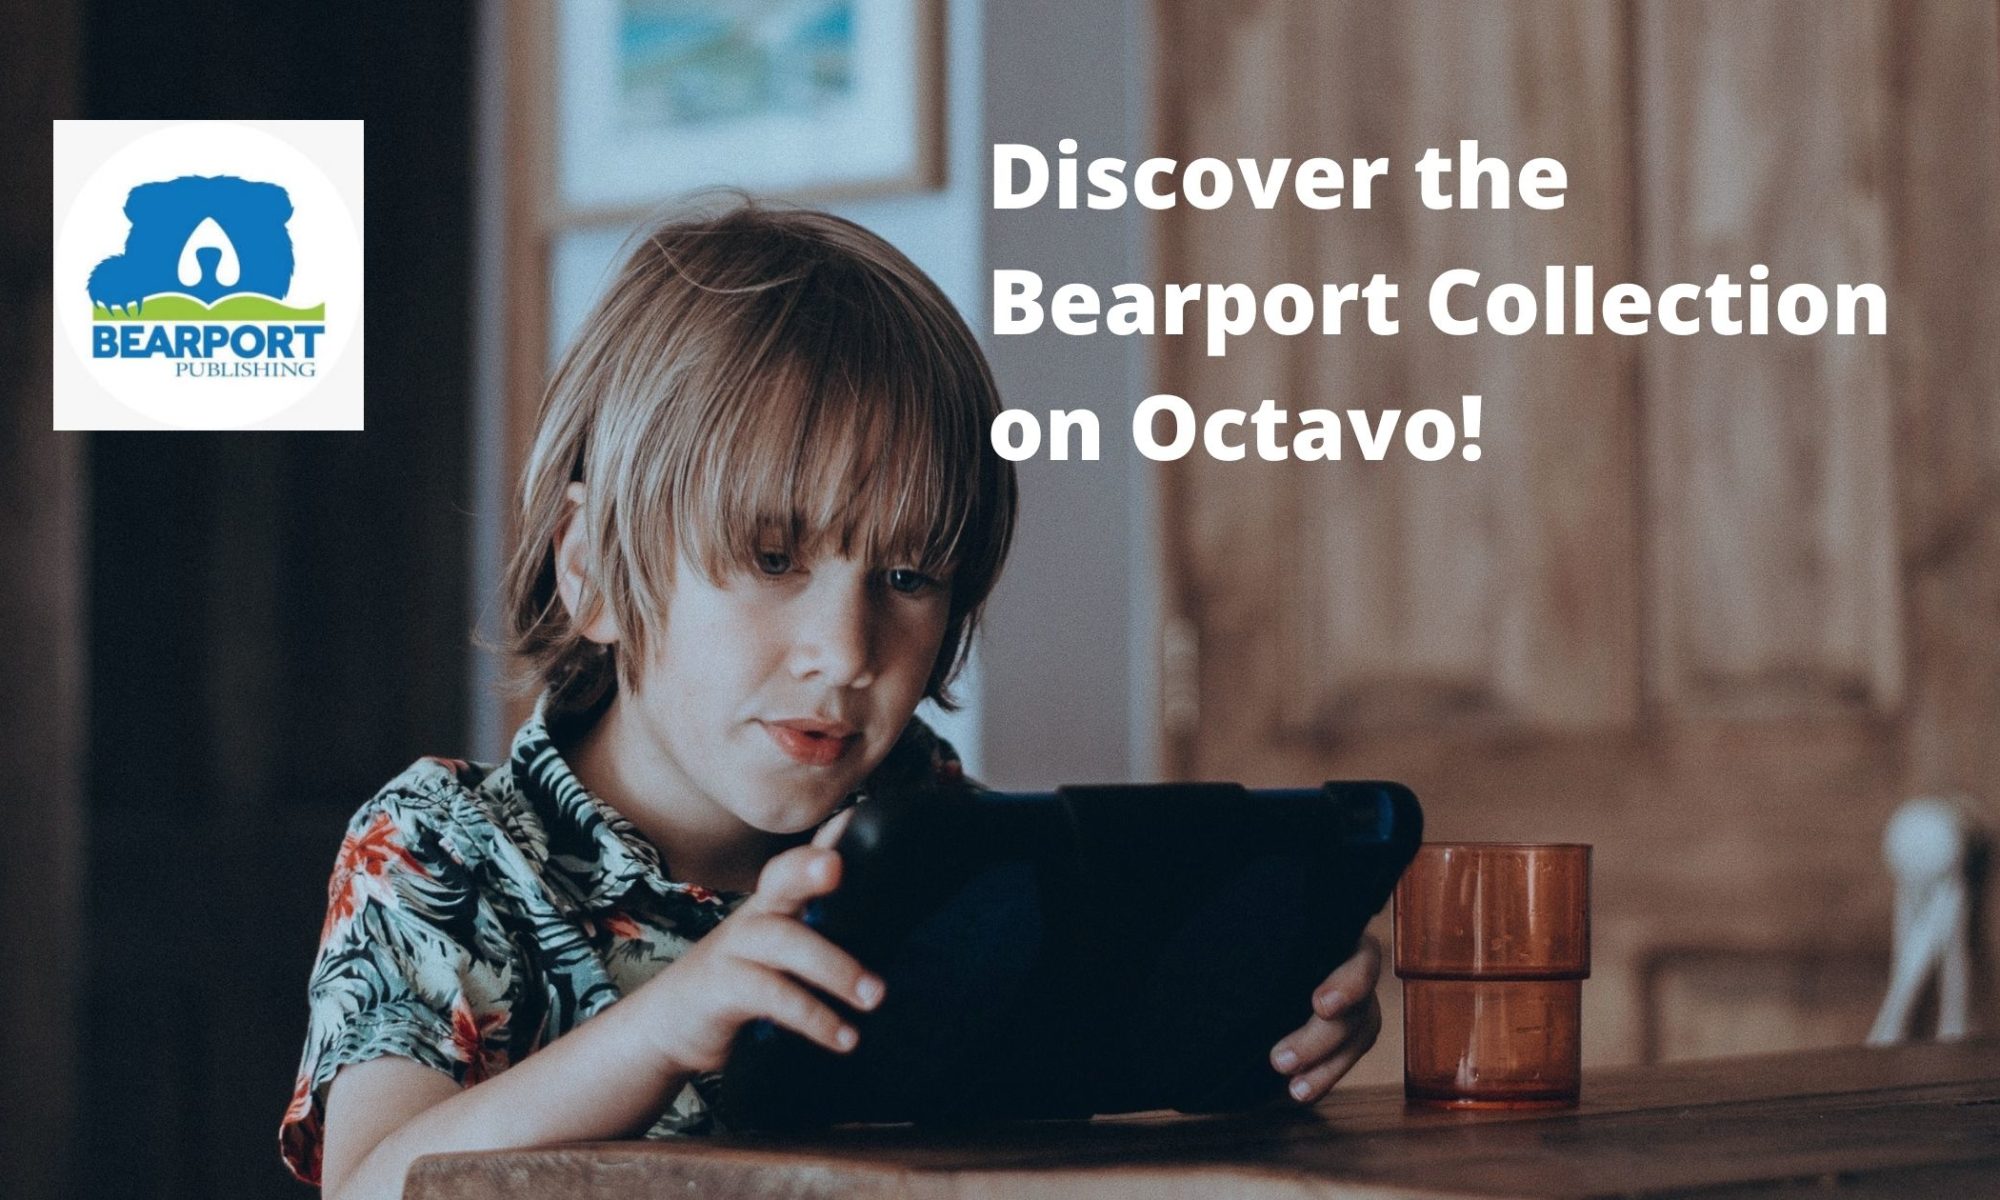 The Bearport Publishing Collection is now available on Octavo